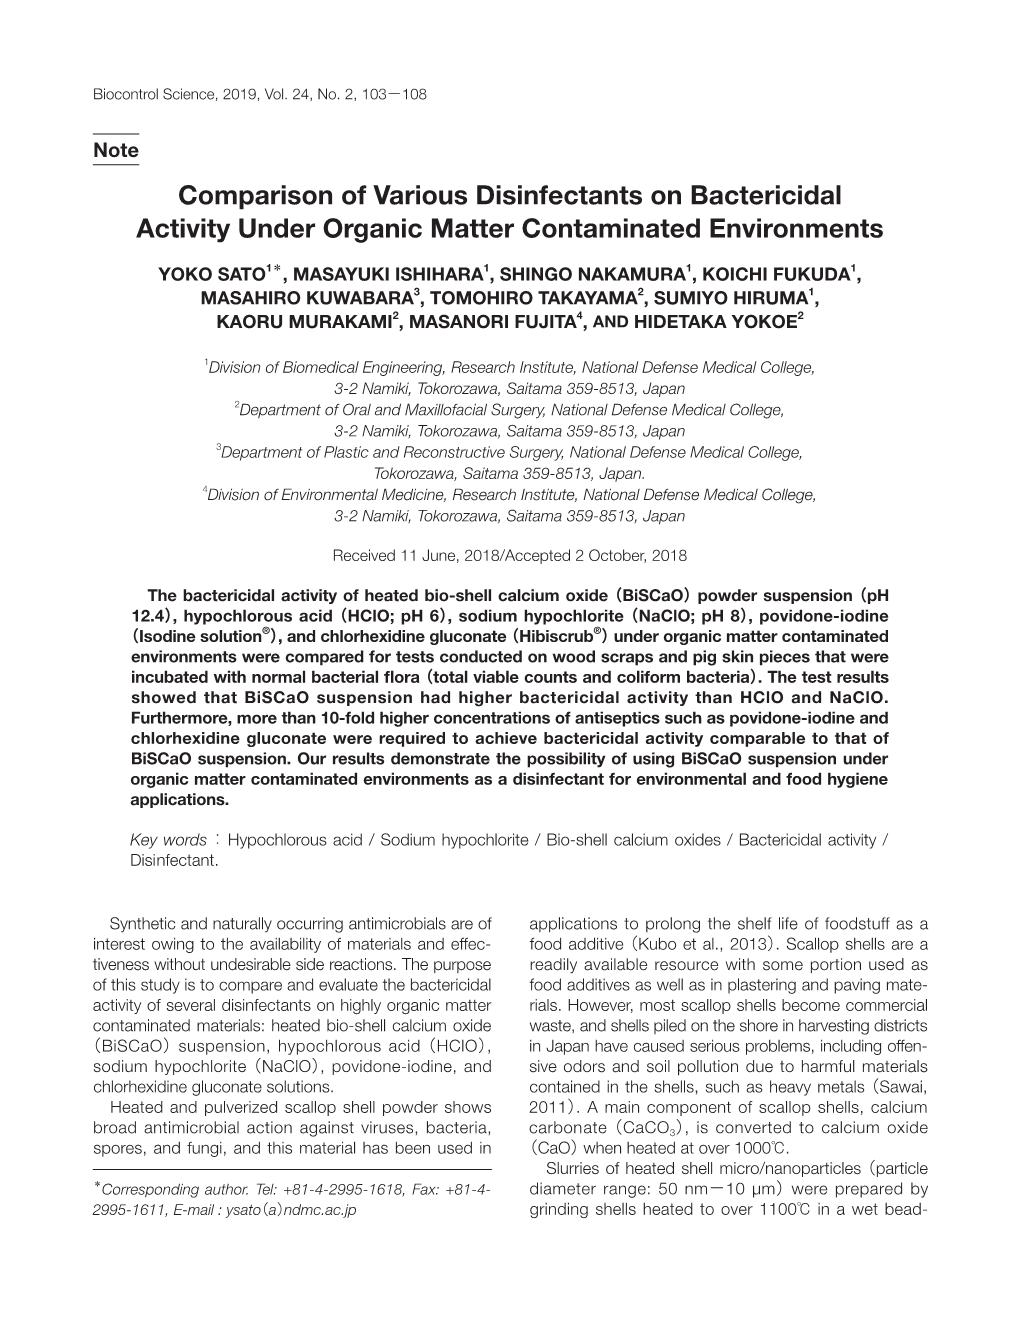 Comparison of Various Disinfectants on Bactericidal Activity Under Organic Matter Contaminated Environments